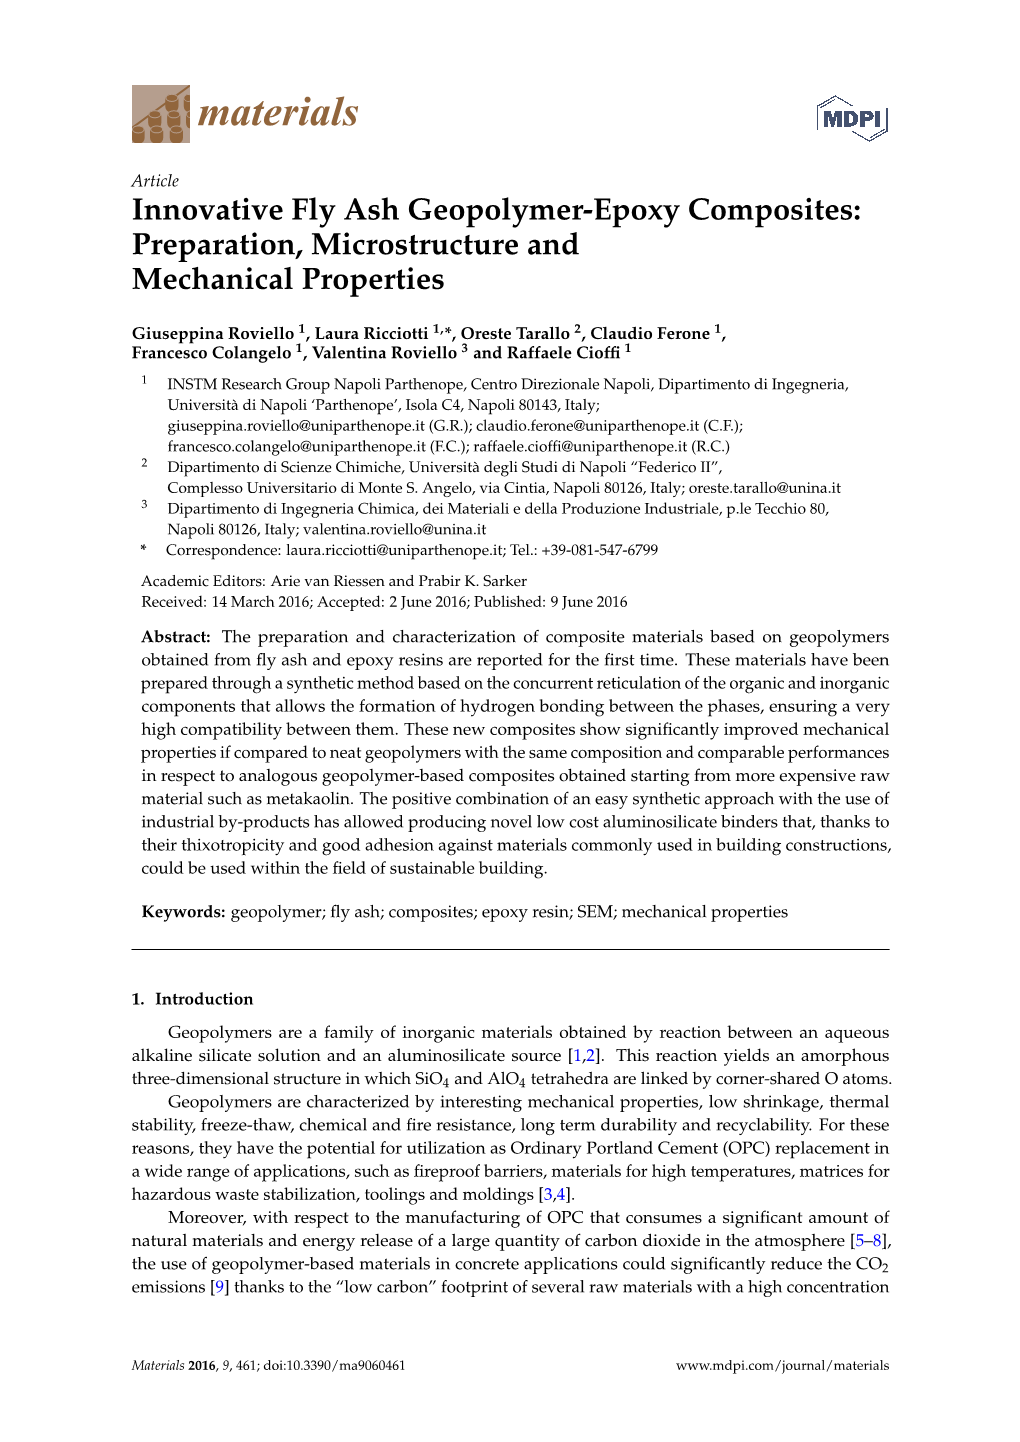 Innovative Fly Ash Geopolymer-Epoxy Composites: Preparation, Microstructure and Mechanical Properties